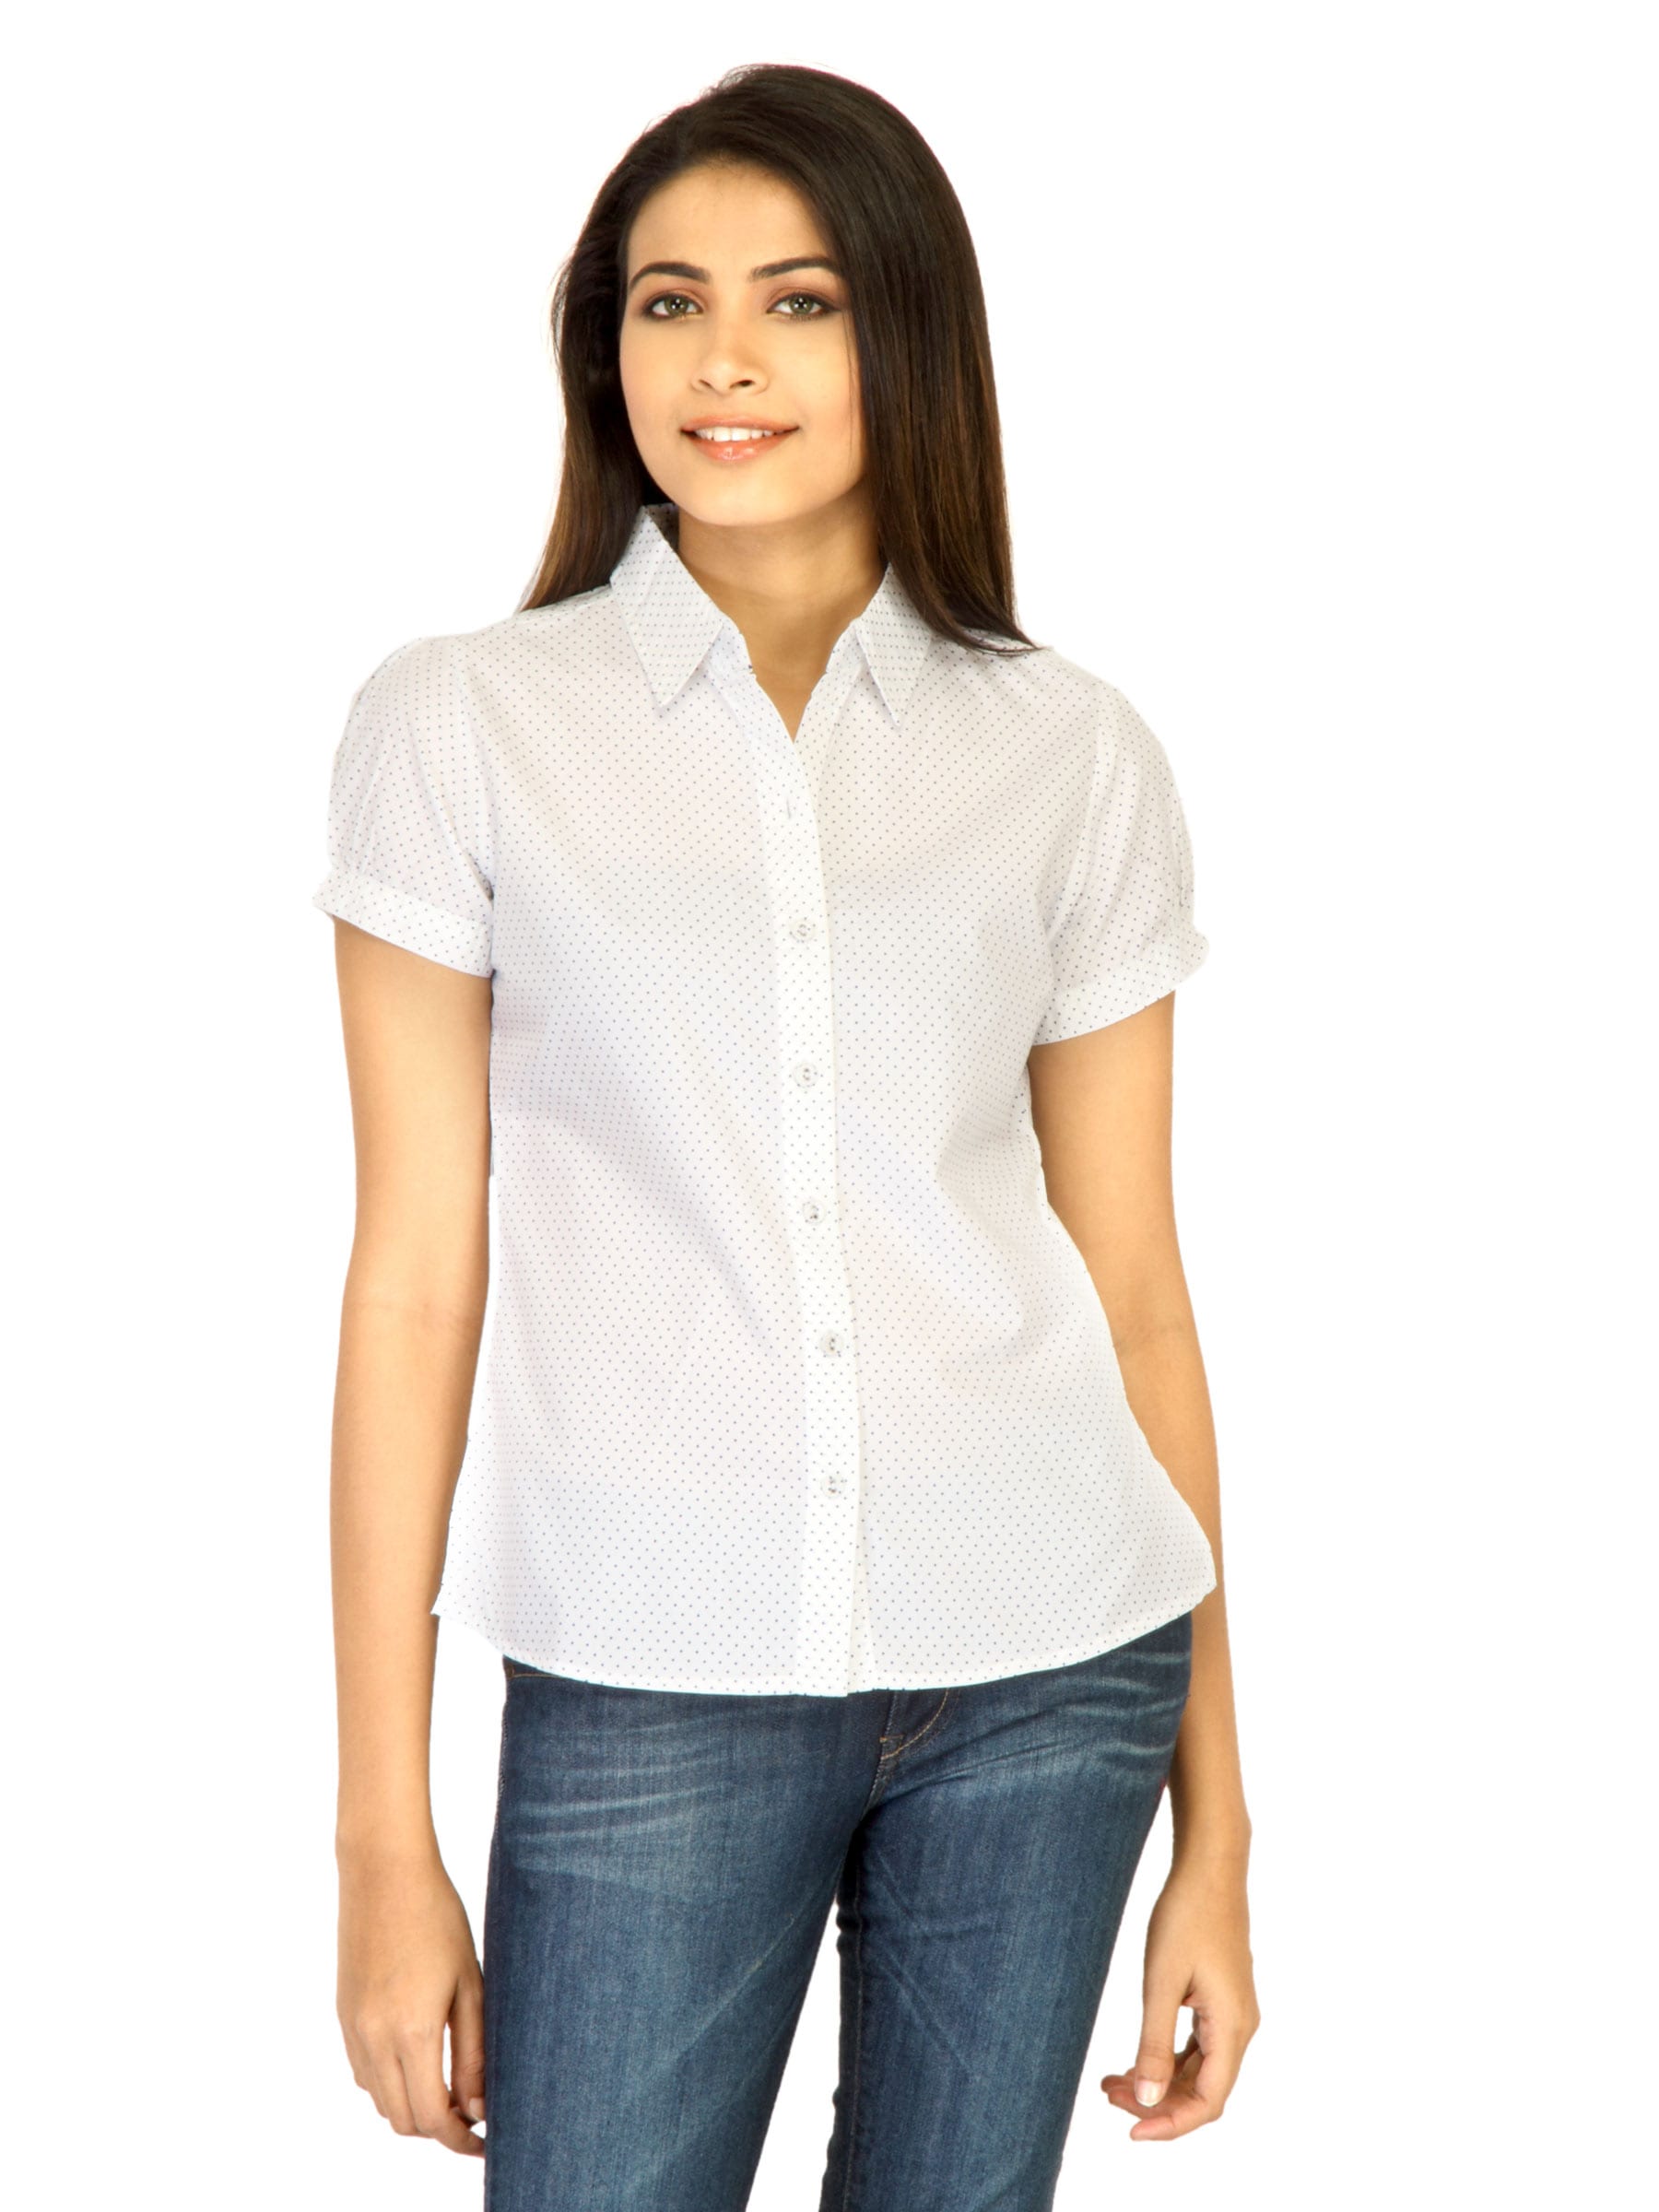 Scullers For Her Women Lightwork White Shirts